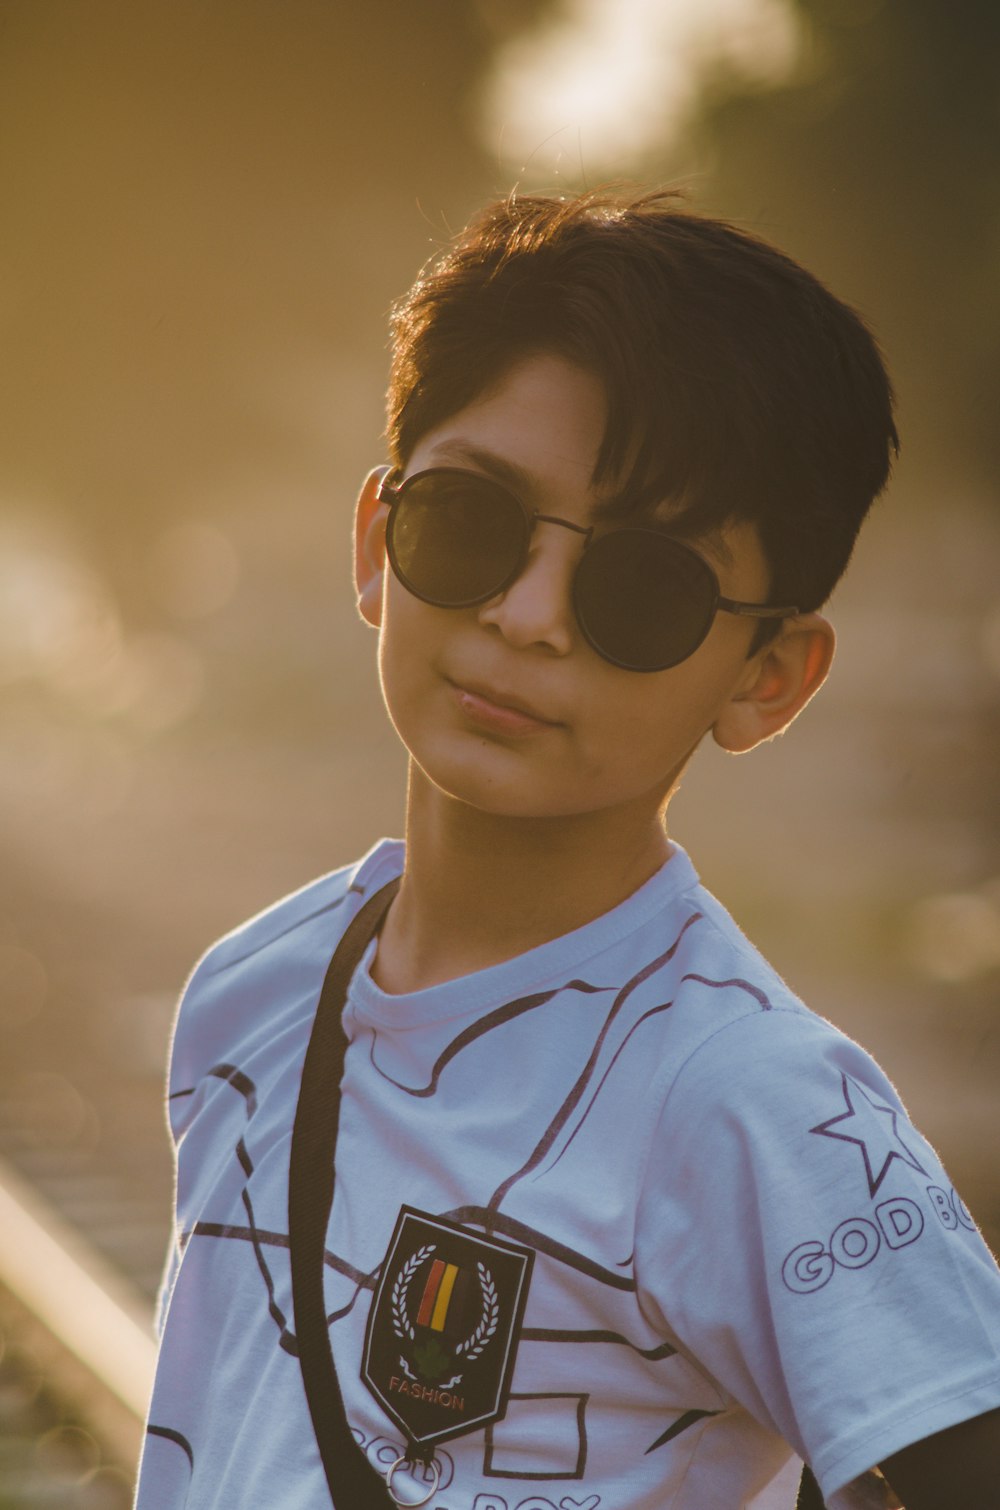 boy in white and blue crew neck shirt wearing black sunglasses